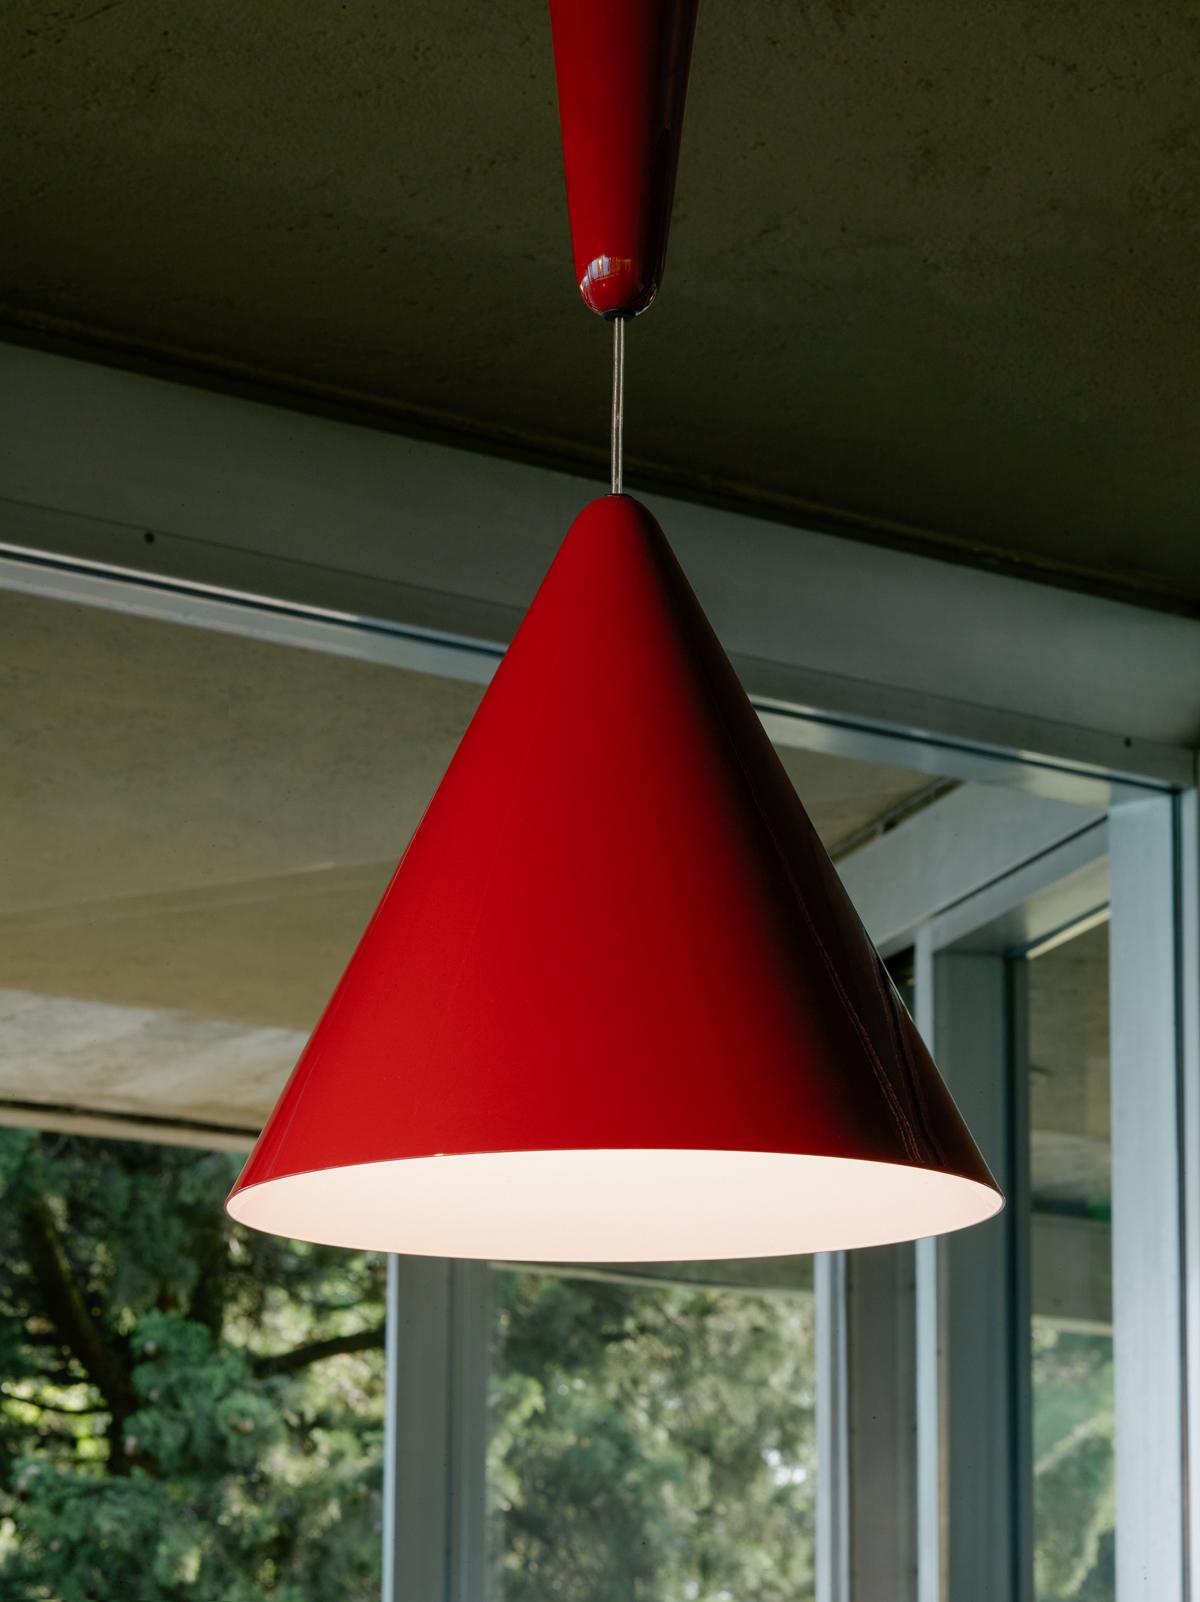 Pendant light with direct lighting designed by A. Castiglioni, composed of a ceiling rose and diffuser. Body in aluminium with external paint in 3 different colour options (shiny white, beaver brown, and cherry red), while the inside of the diffuser